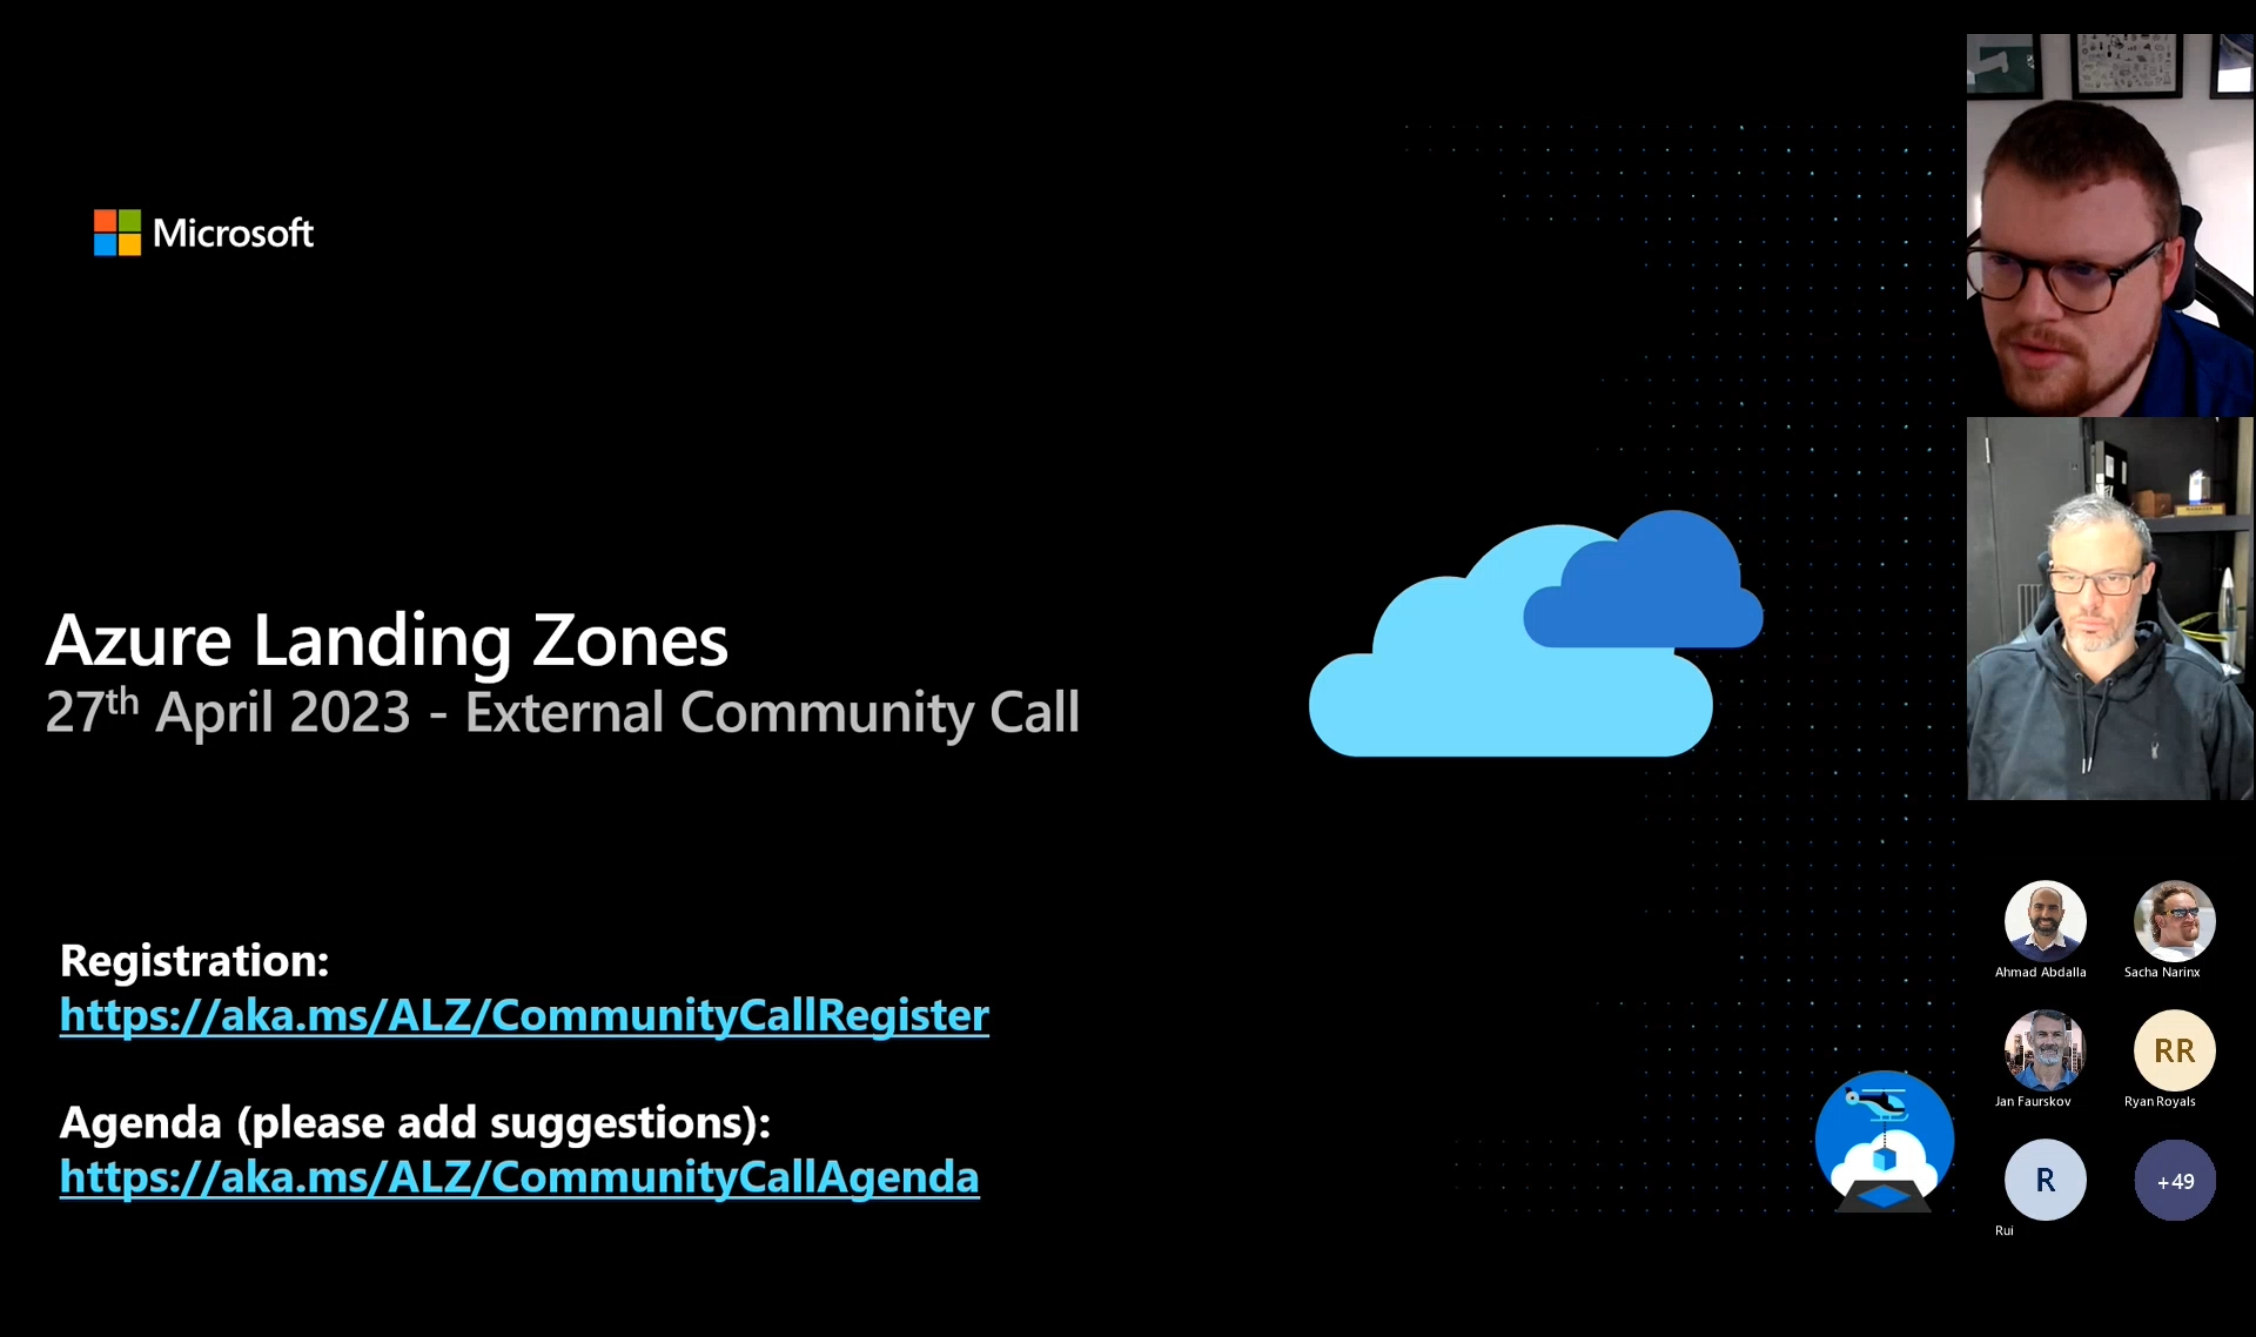 Screenshot of Azure Landing Zones Community Call from April 2023 recording on YouTube